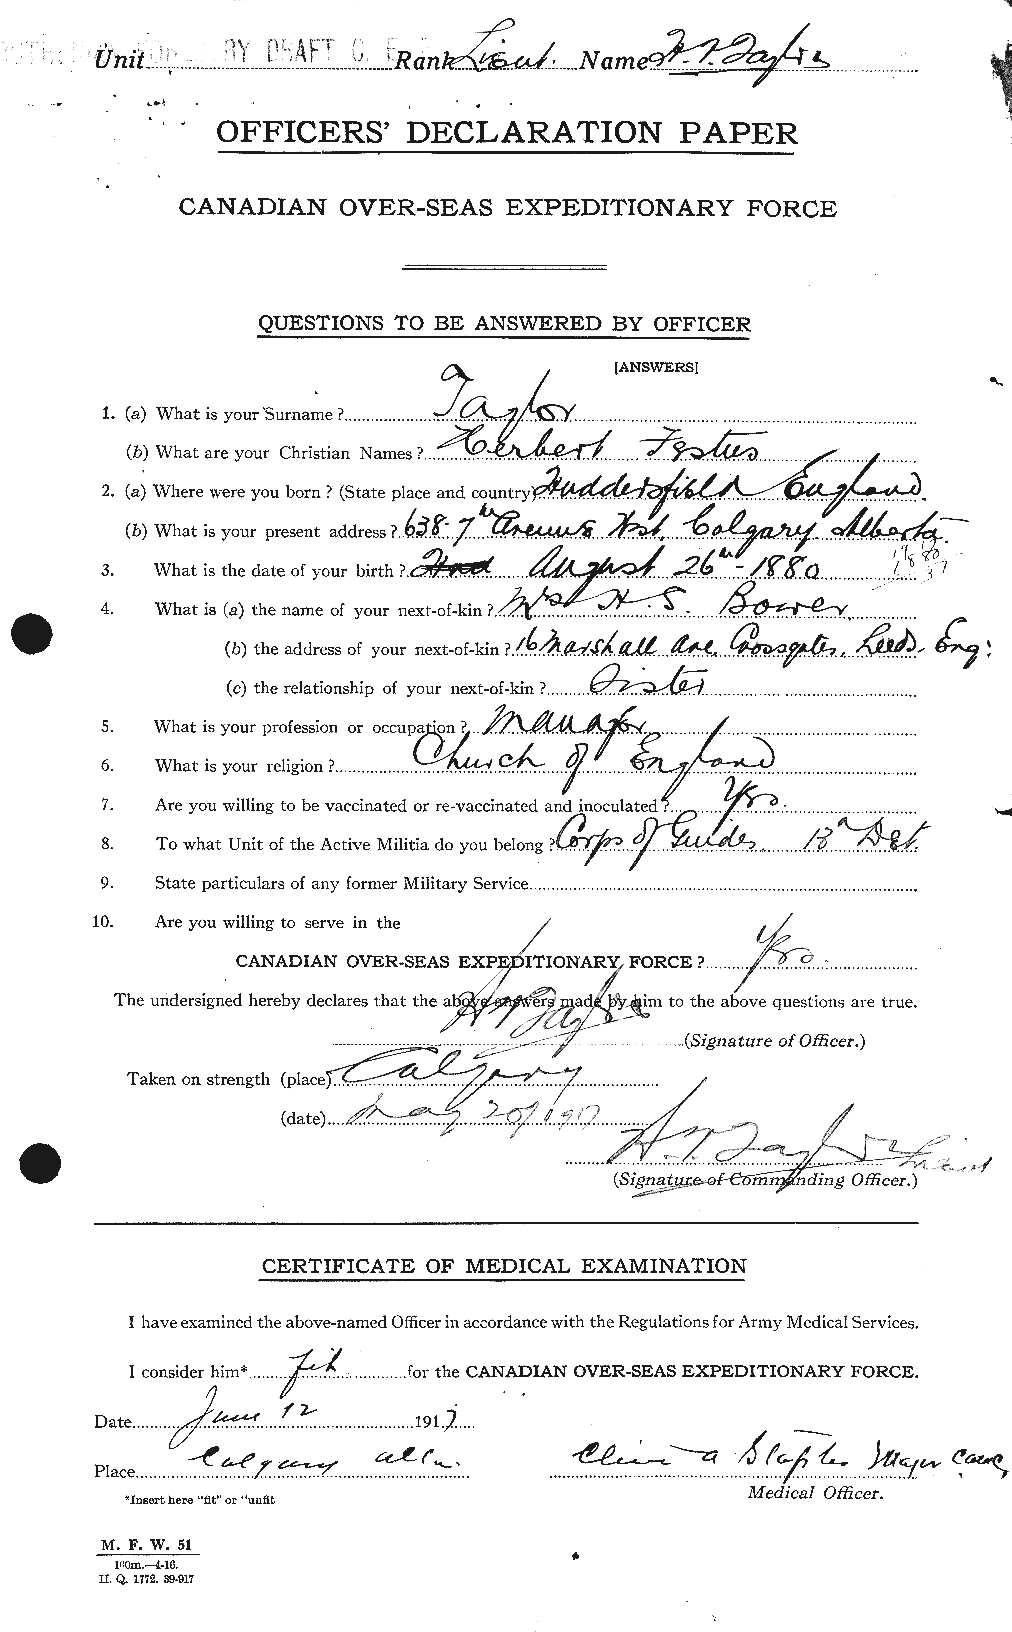 Personnel Records of the First World War - CEF 626567a